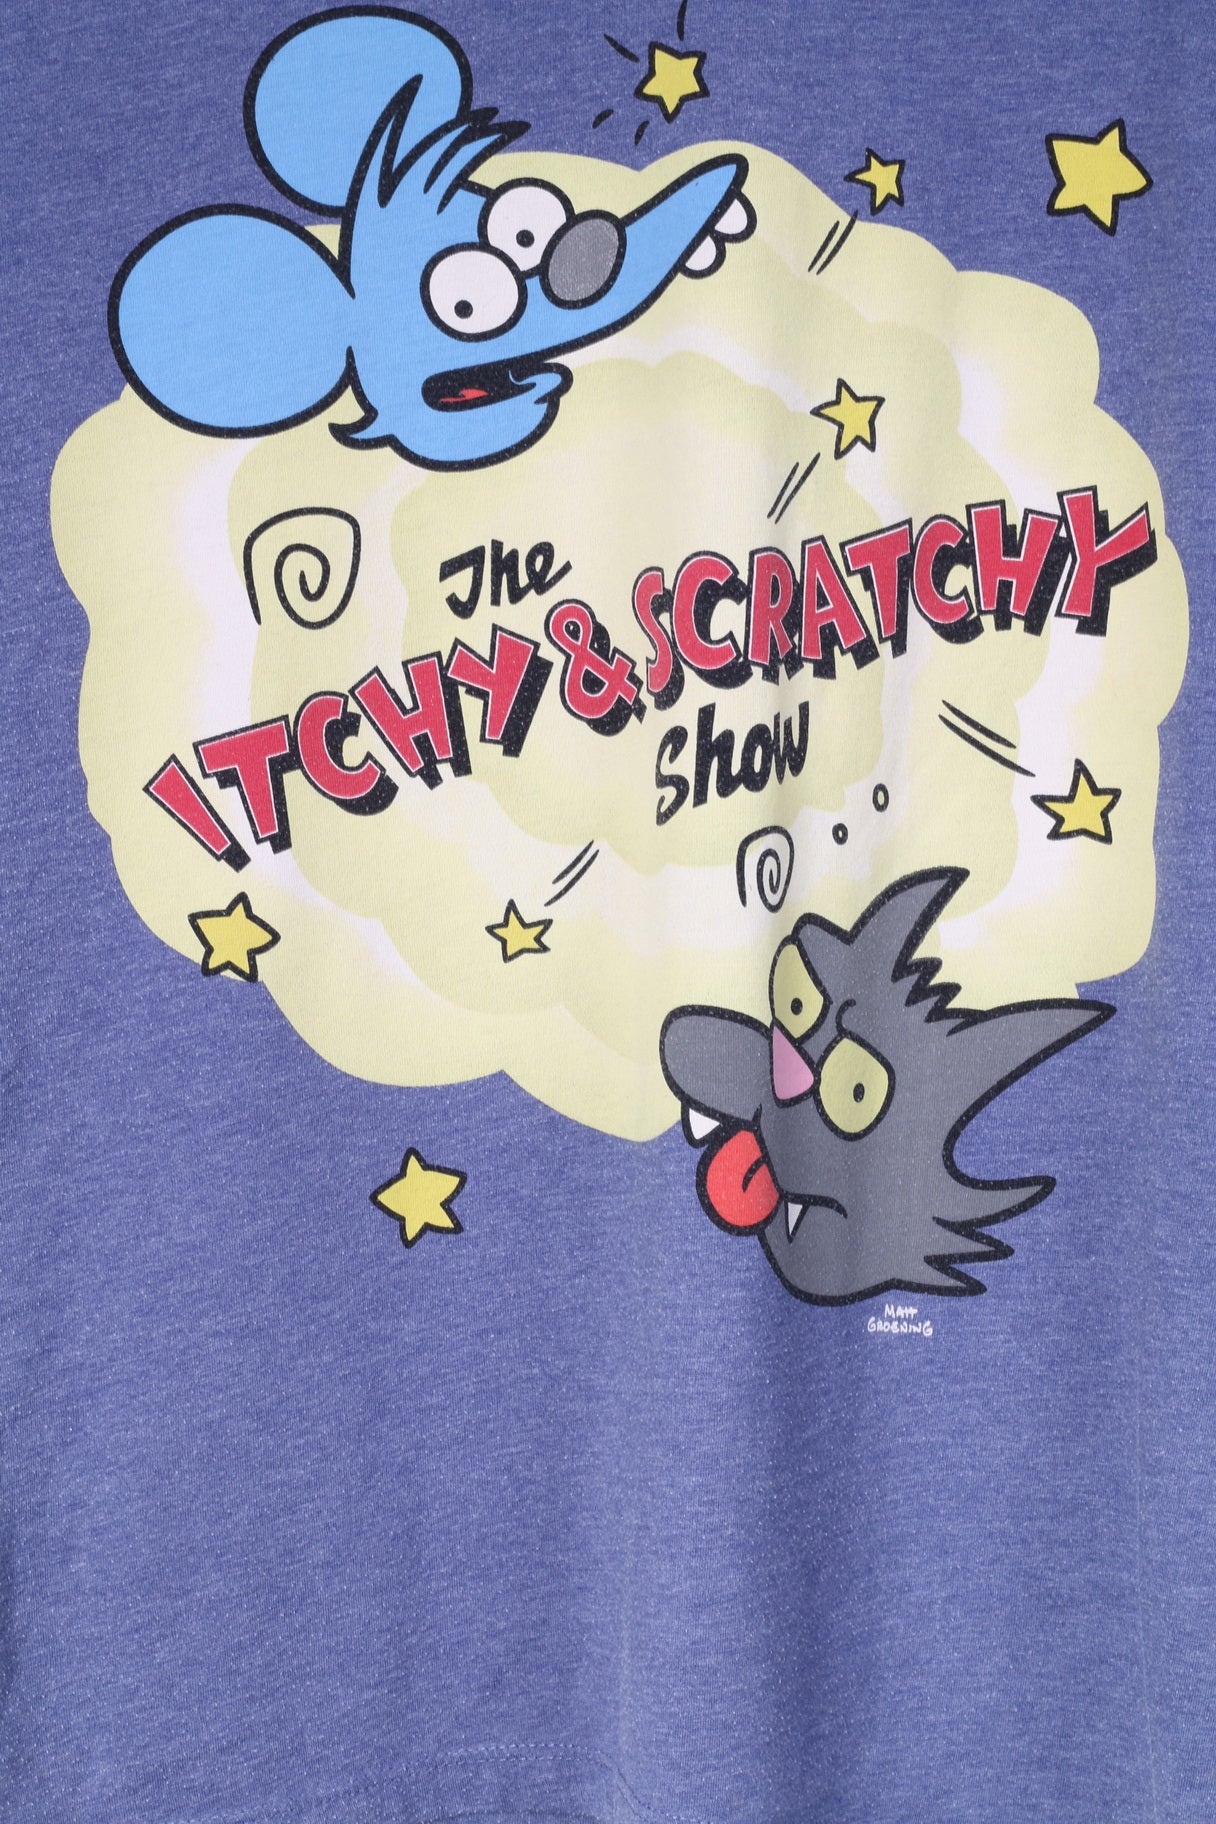 C&A The Simpsons Men S T-Shirt Blue Cotton Blend Graphic The Itchy & Scratchy Show